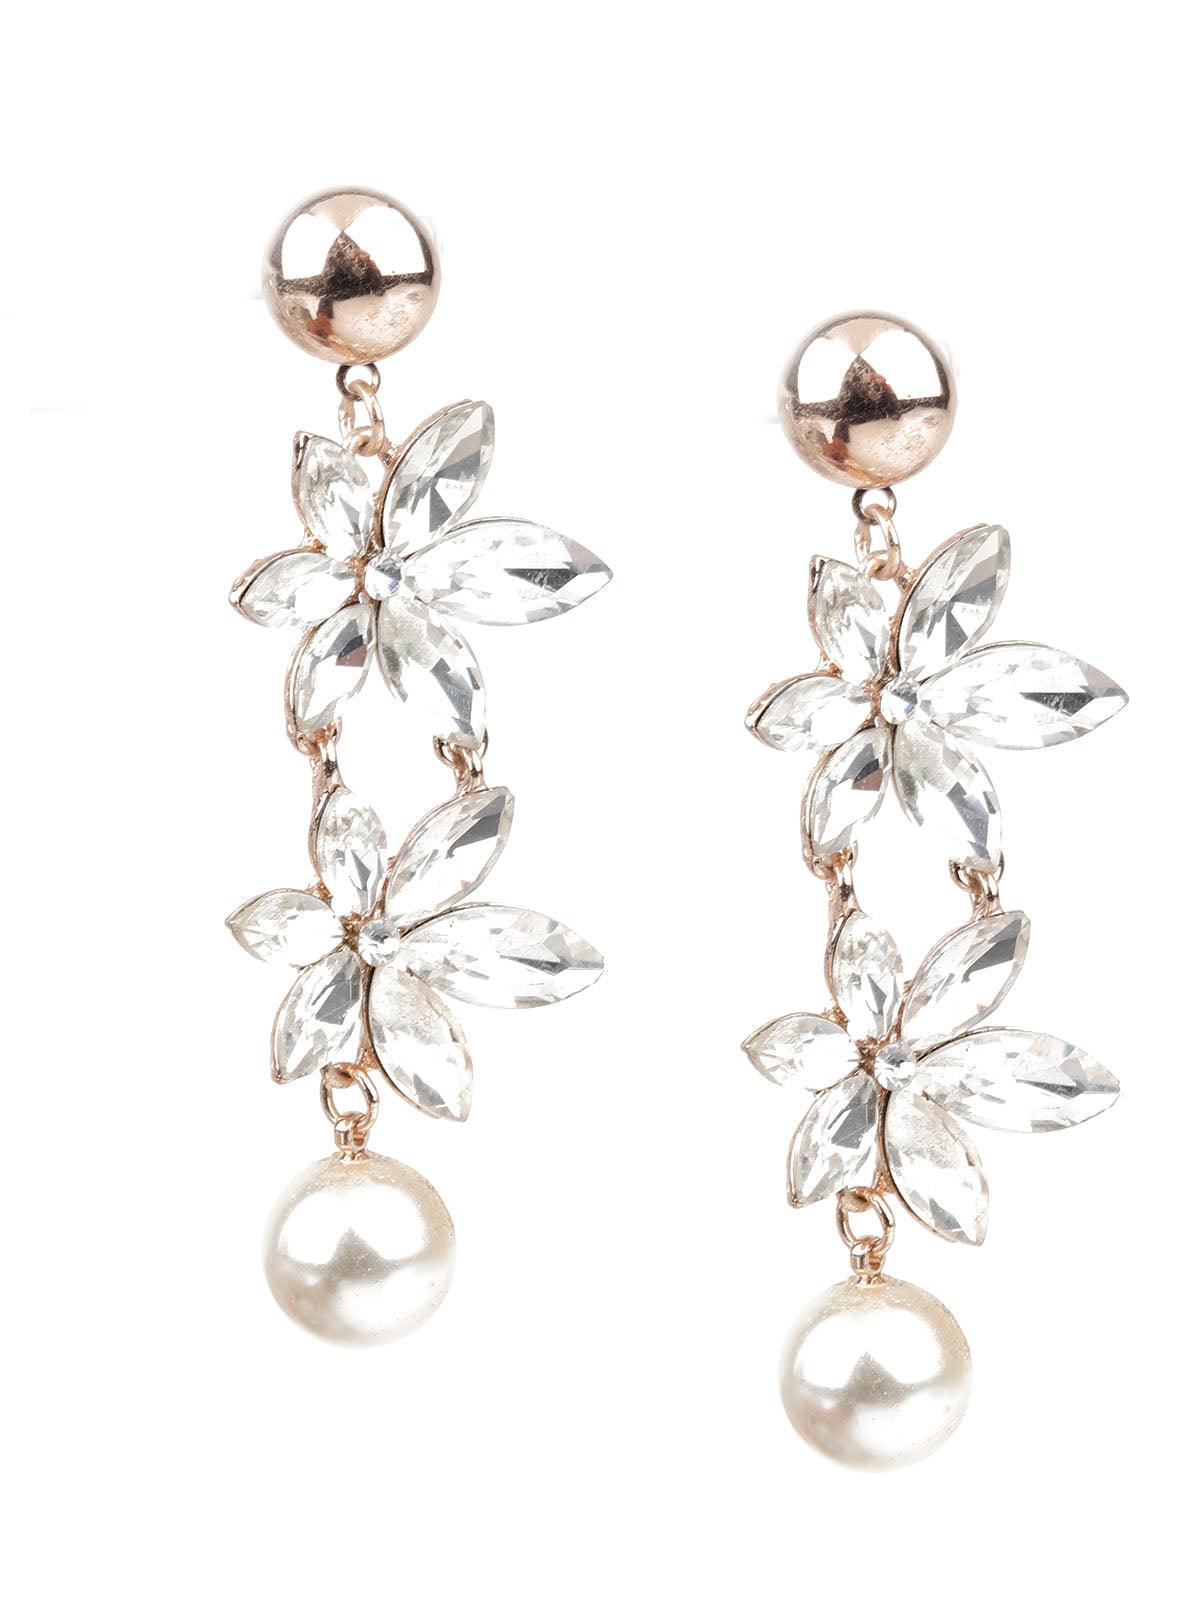 TRENDY GOLD AND WHITE EARRINGS - Odette